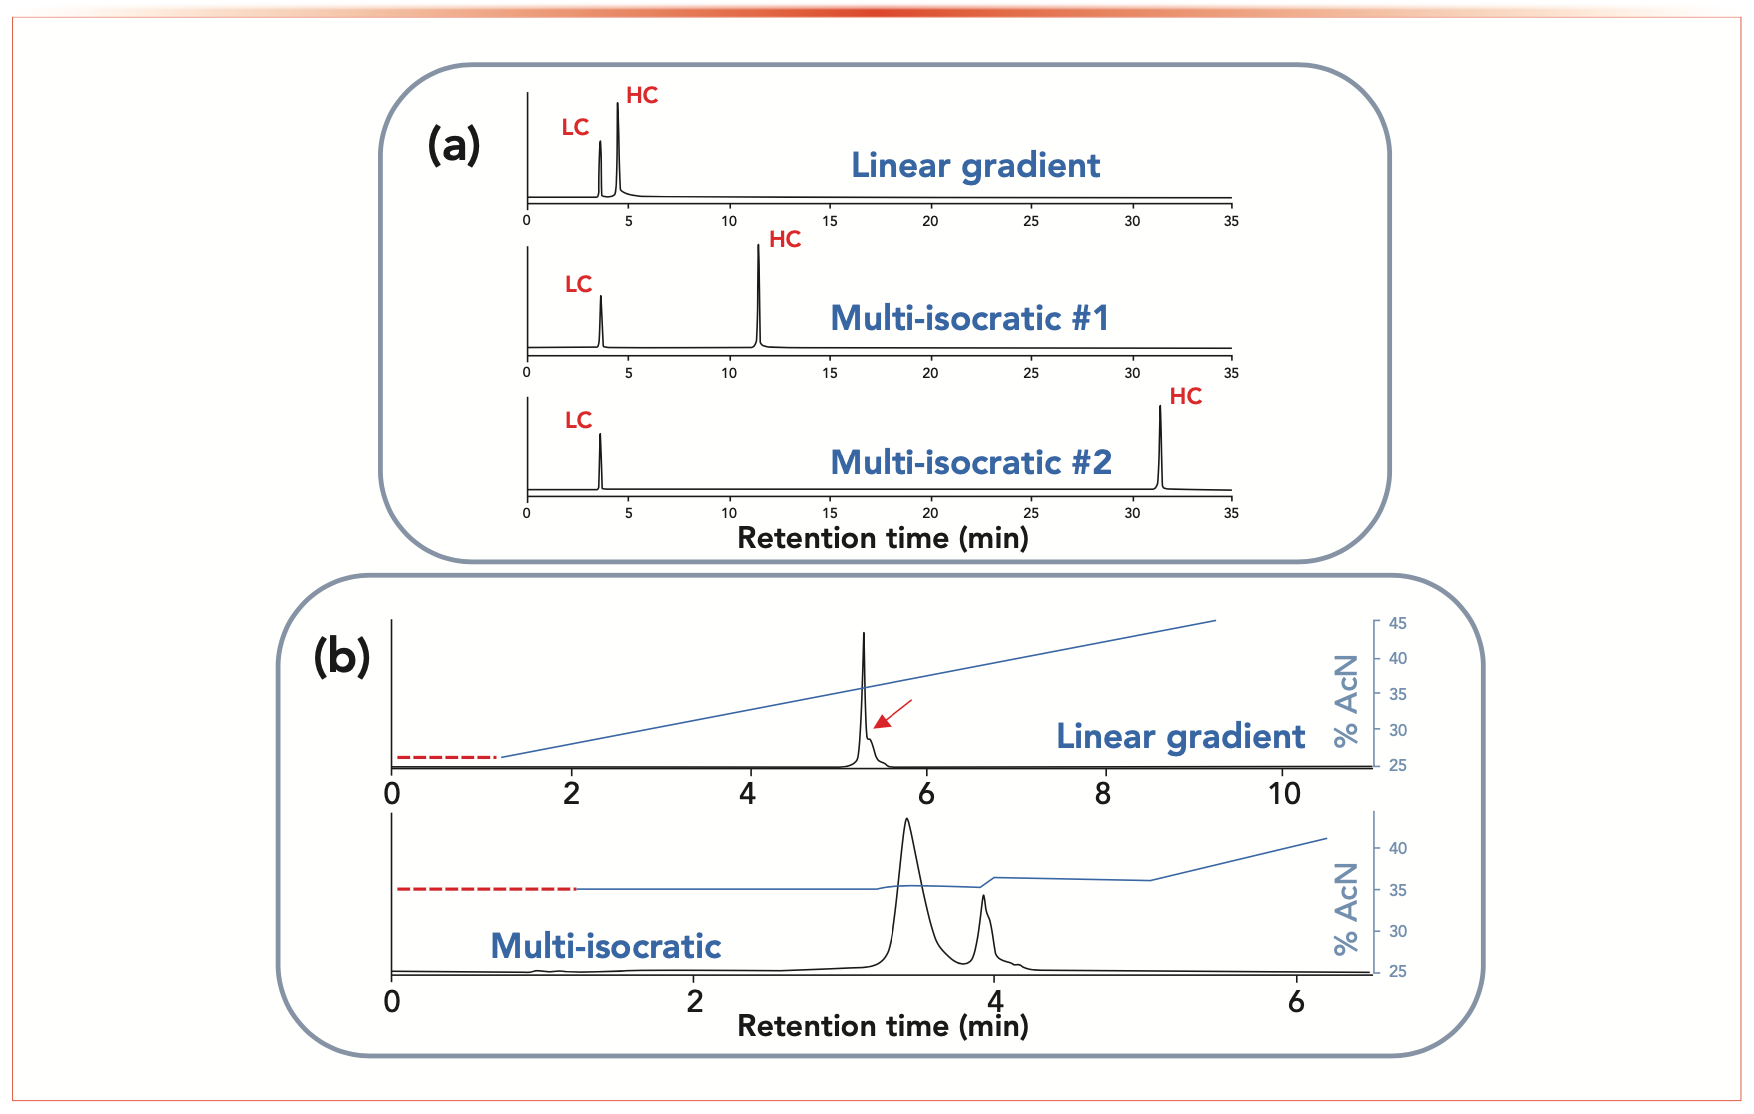 FIGURE 2: Separation of (a) daratumumab subunits (reduced sample), and (b) separation of intact antibody (atezolizumab) variants using linear gradient and multi-isocratic elution mode. Here, the selectivity was arbitrarily changed by adjusting the length of the isocratic segment between the two peaks. Adapted from (7) with permission from the American Chemical Society.